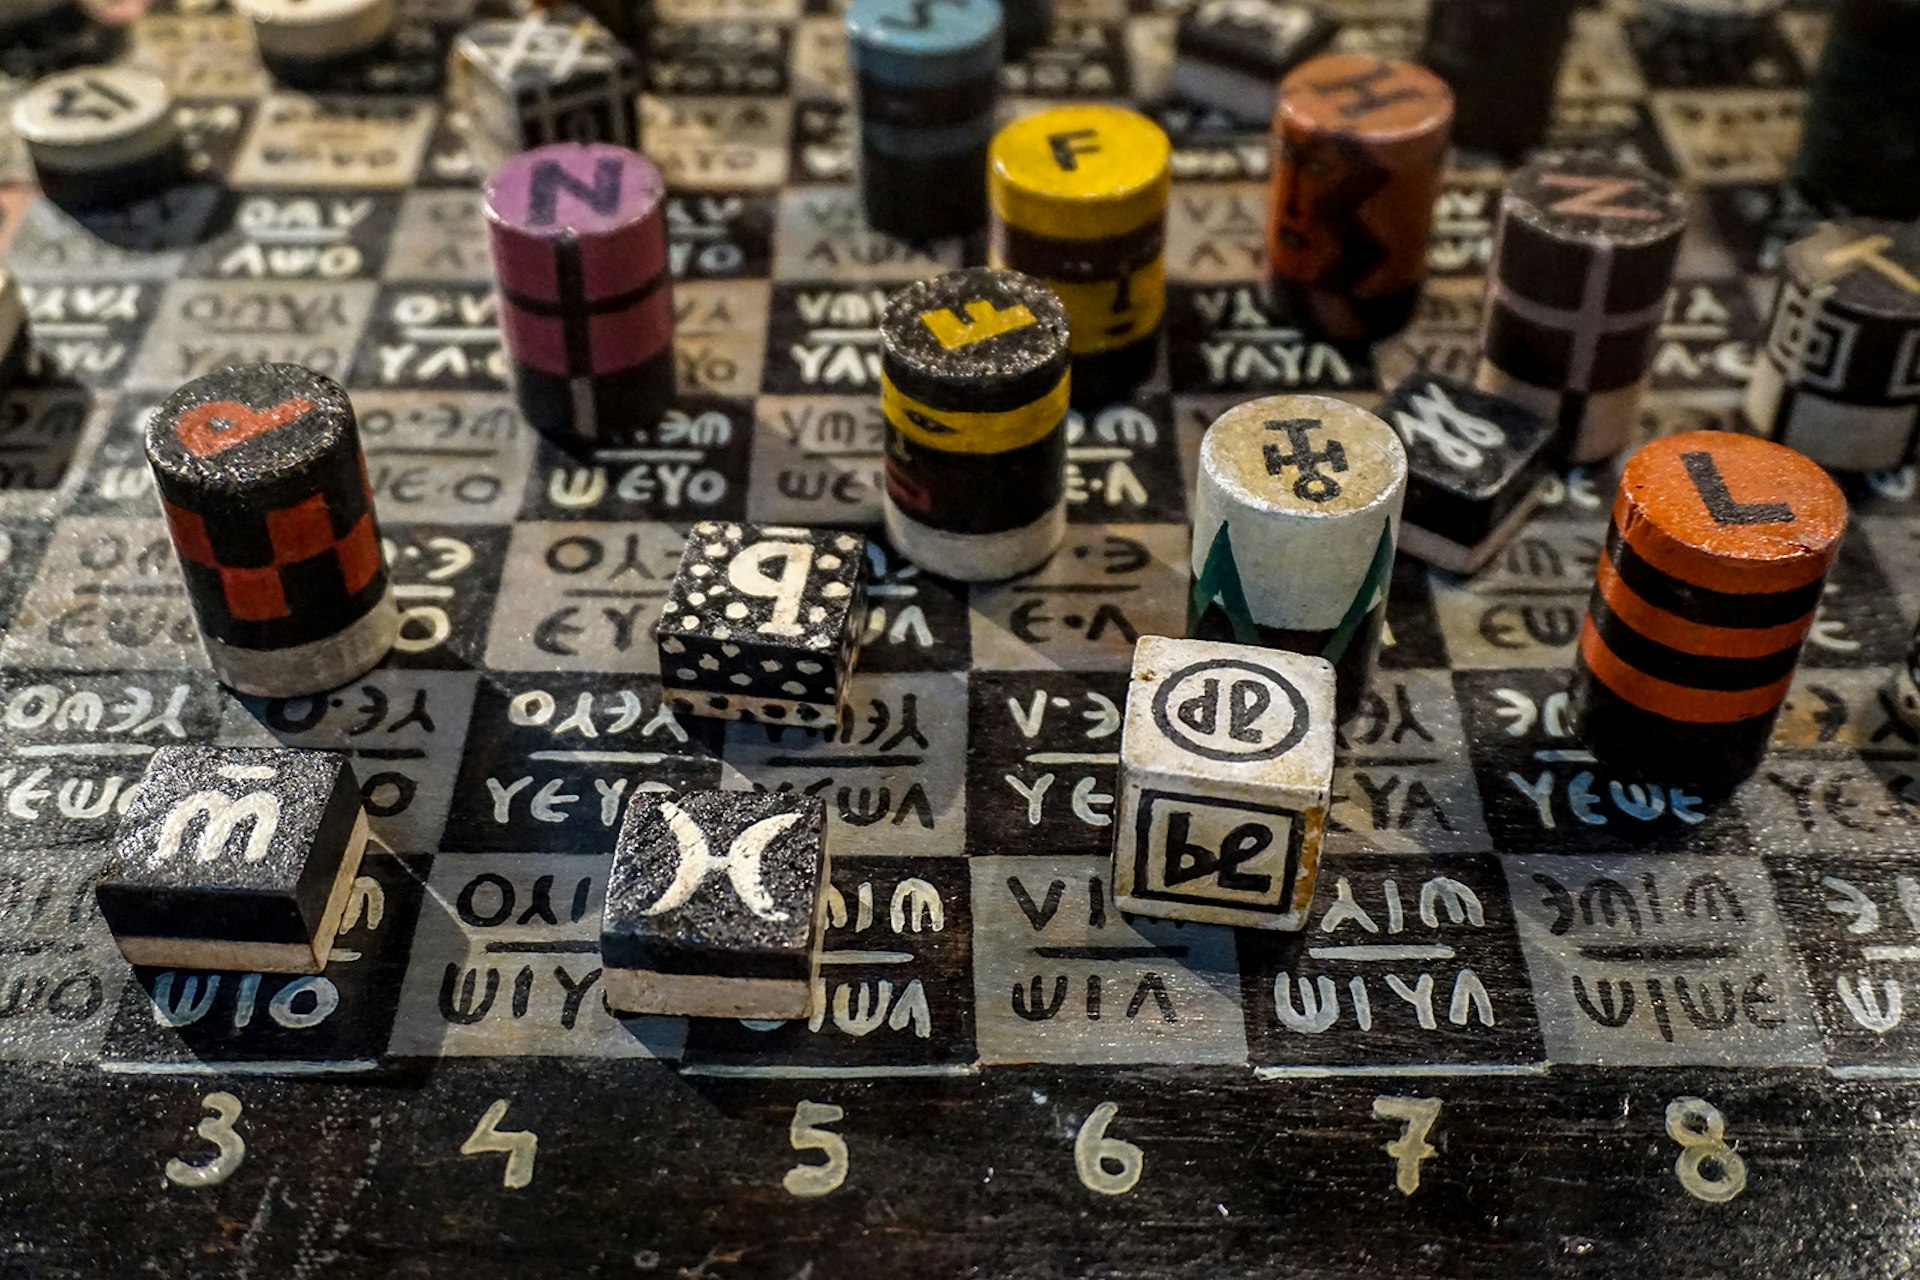 An overhead shot of unusual square and cylindrical chess pieces covered in patterns and symbols